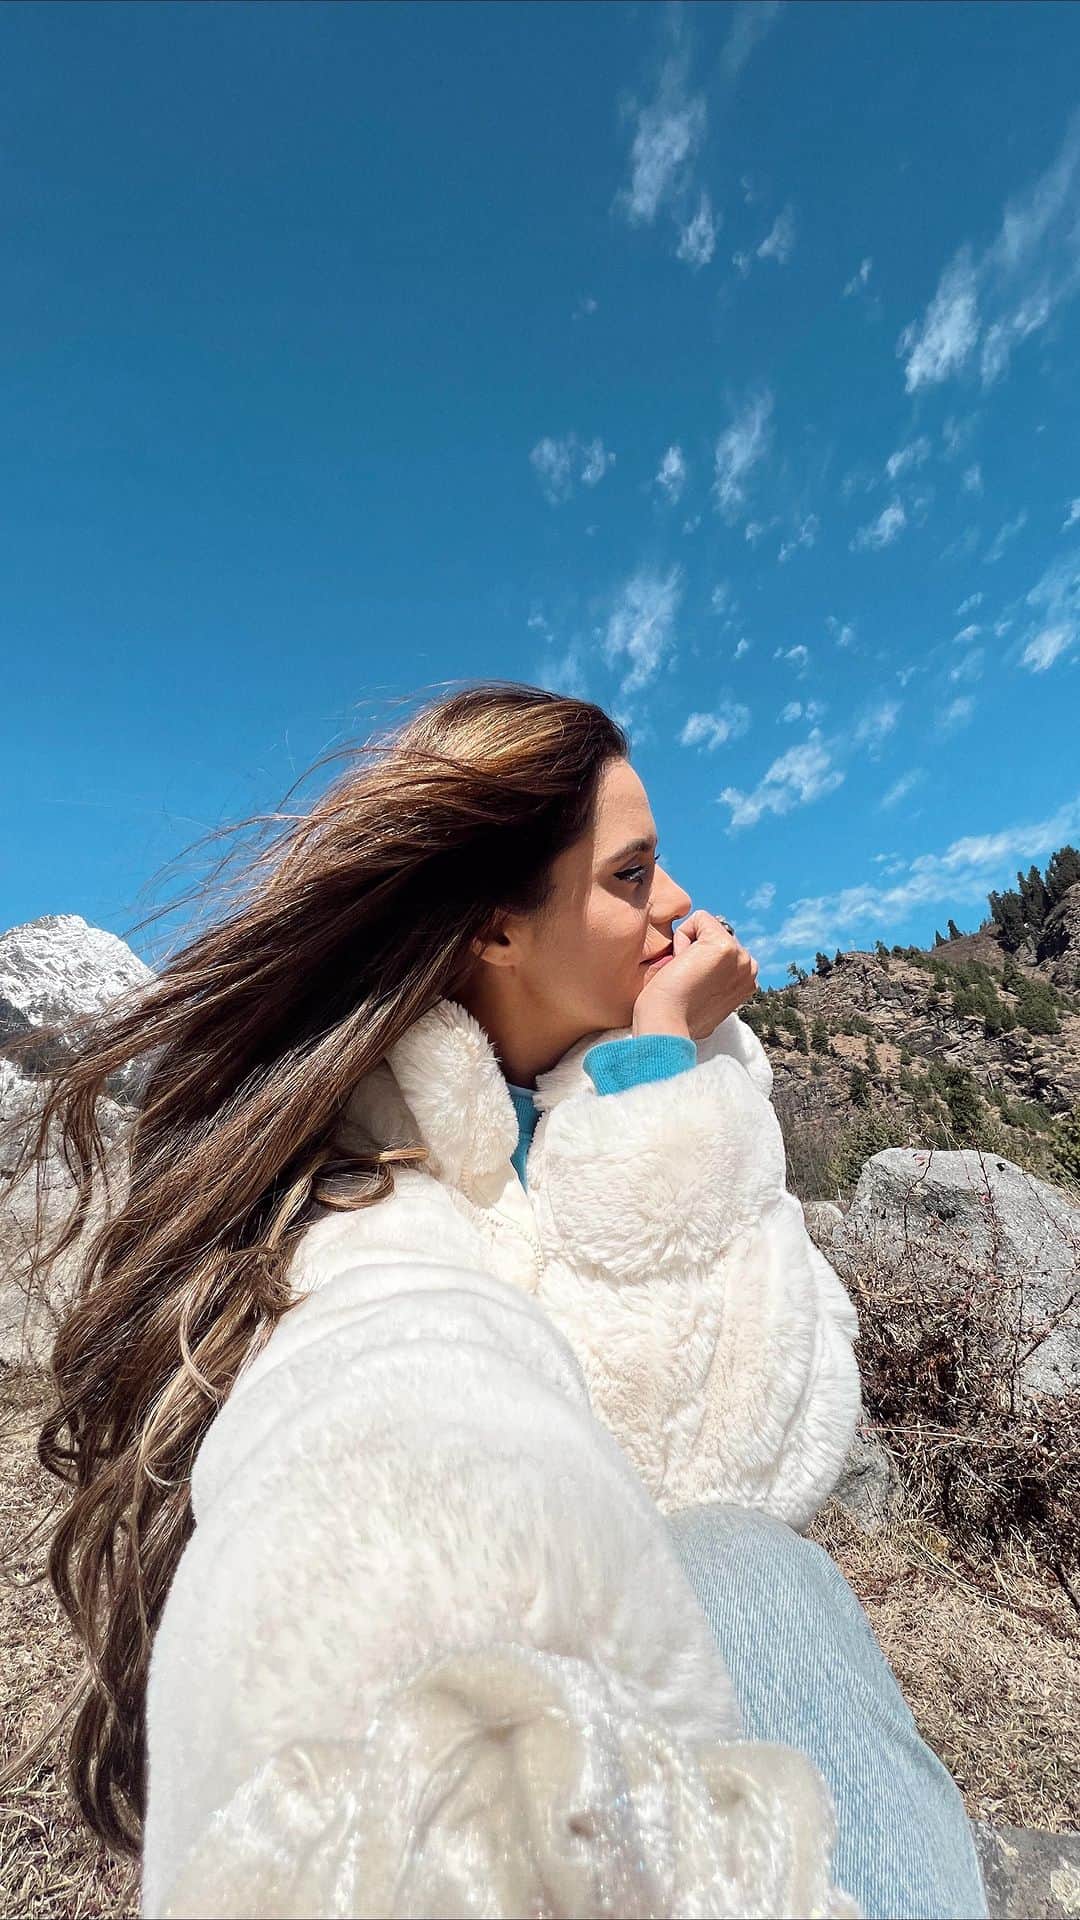 Aakriti Ranaのインスタグラム：「Just a few months ago we got married in Manali and the roads were absolutely breathtaking. I was shocked to see the state of the roads and Manali this time. It took us forever to reach here as one side of the road has completely been damaged due to landslide and the traffic has to wait for one side to move and then the other side moves. Manali is usually full of tourists but it feels so dead now. A lot of restaurants and hotels are closed as there is no business. It’s heartbreaking to see this.   Share this with someone who is planning a trip to Himachal.   #aakritirana #manali #delhimanalihighway #manalihighway #landslide #travelblogger #himachalpradesh #reelsinstagram」